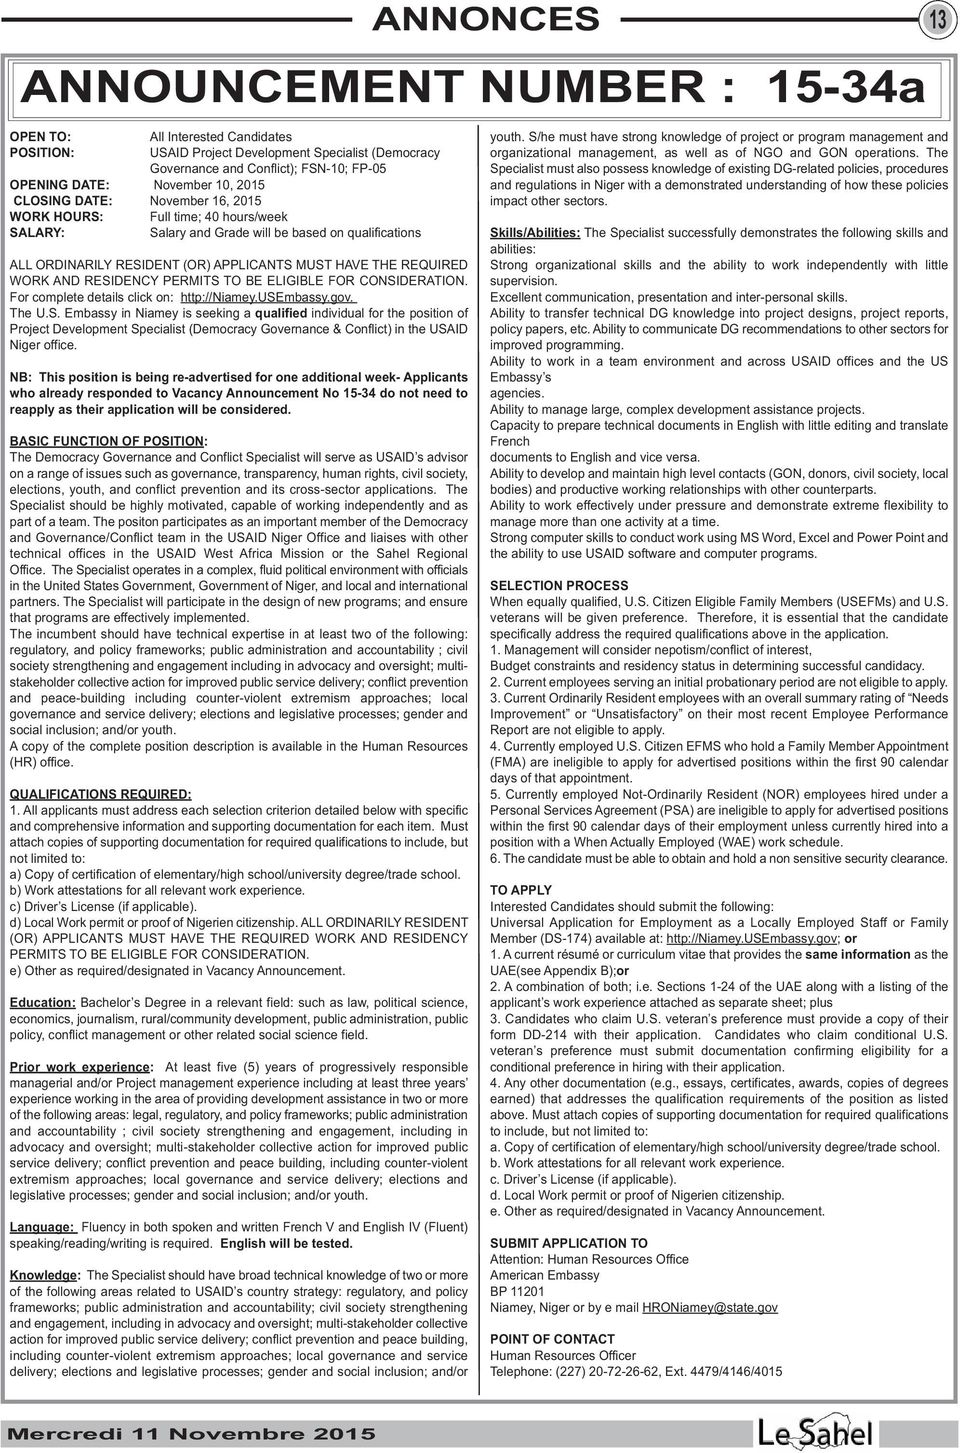 WORK AND RESIDENCY PERMITS TO BE ELIGIBLE FOR CONSIDERATION. For complete details click on: http://niamey.usembassy.gov. The U.S. Embassy in Niamey is seeking a qualified individual for the position of Project Development Specialist (Democracy Governance & Conflict) in the USAID Niger office.